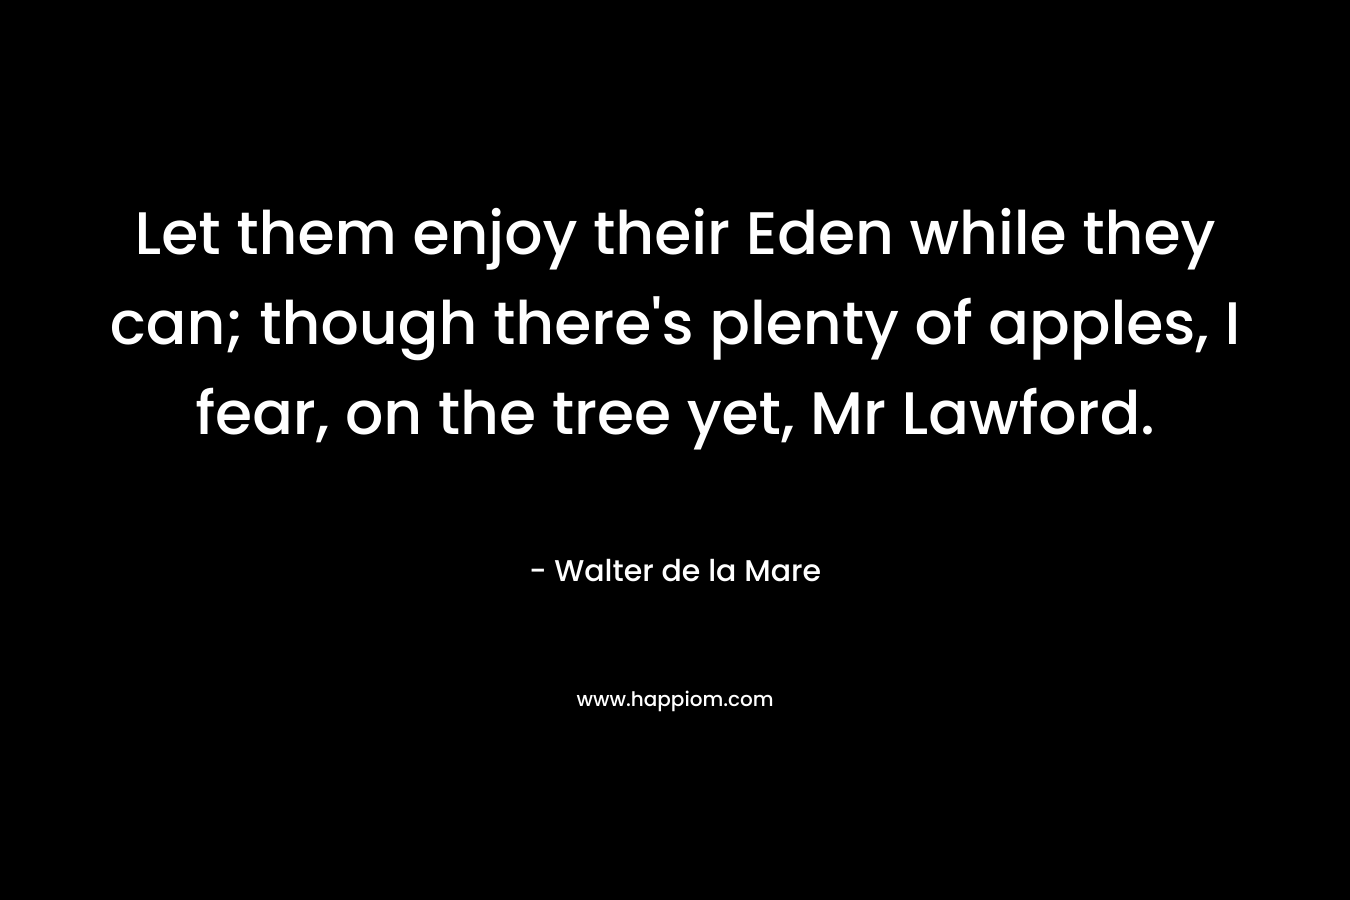 Let them enjoy their Eden while they can; though there’s plenty of apples, I fear, on the tree yet, Mr Lawford. – Walter de la Mare